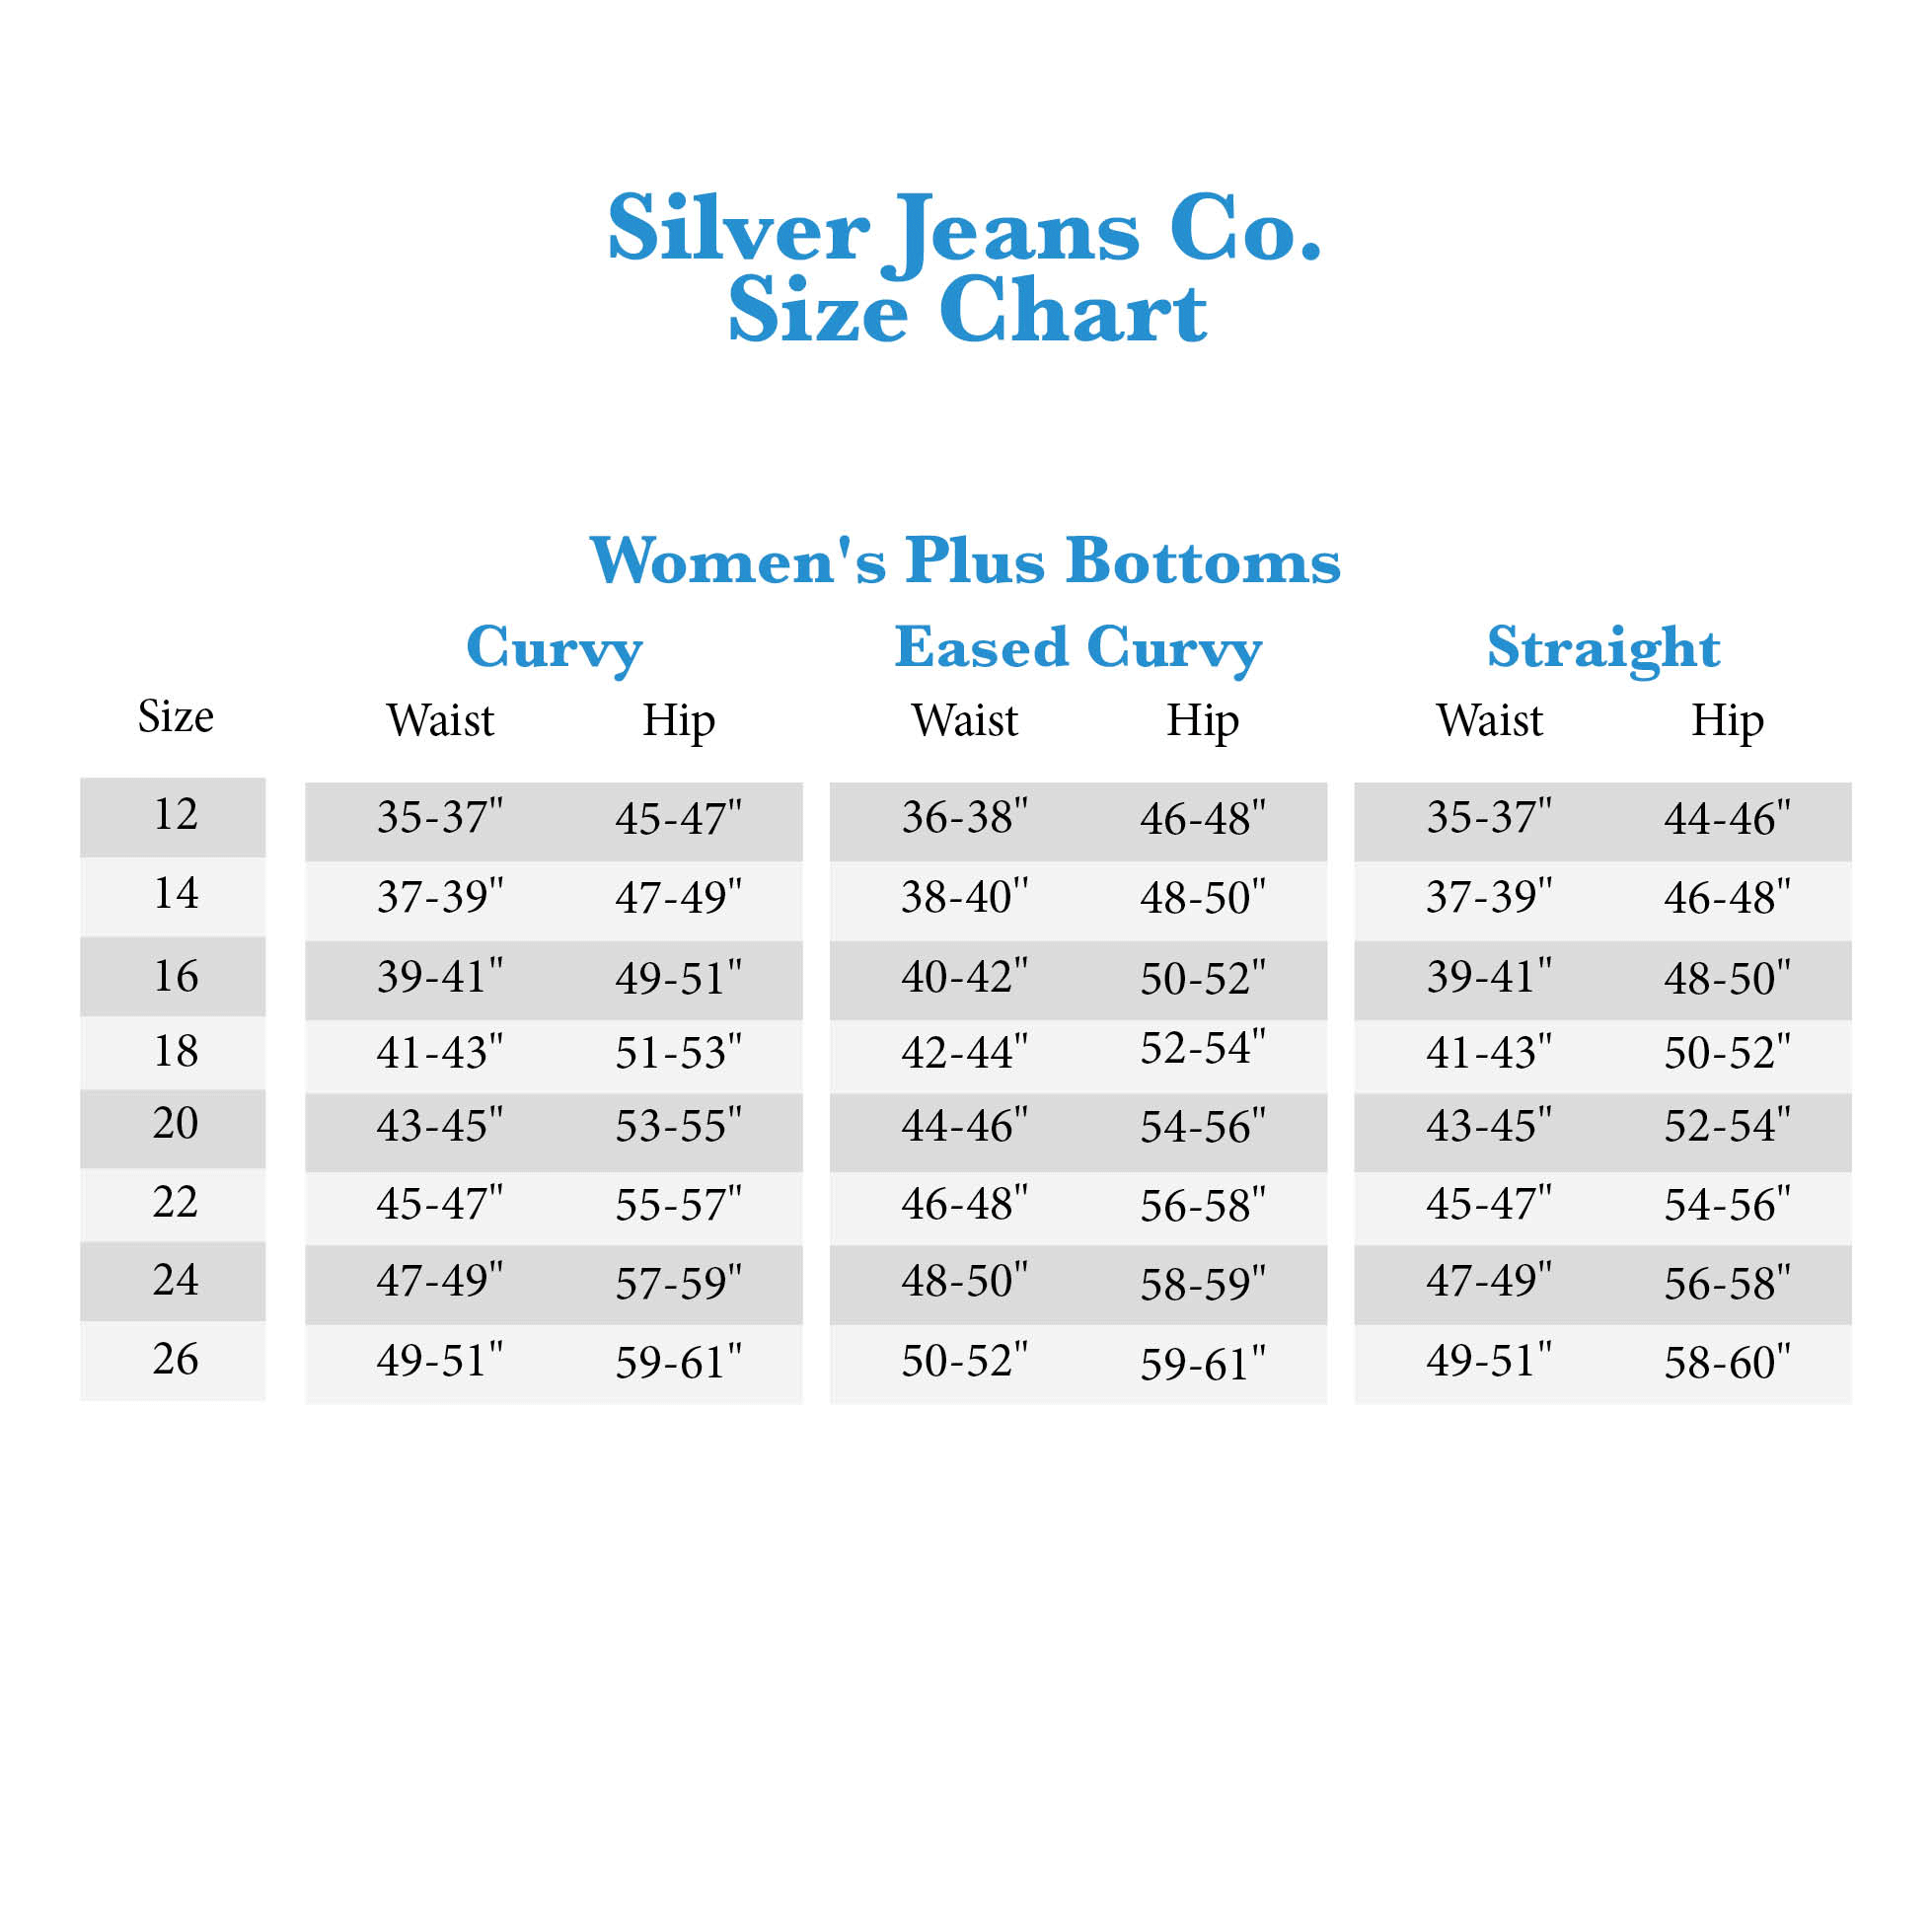 Silver Jeans Conversion Chart